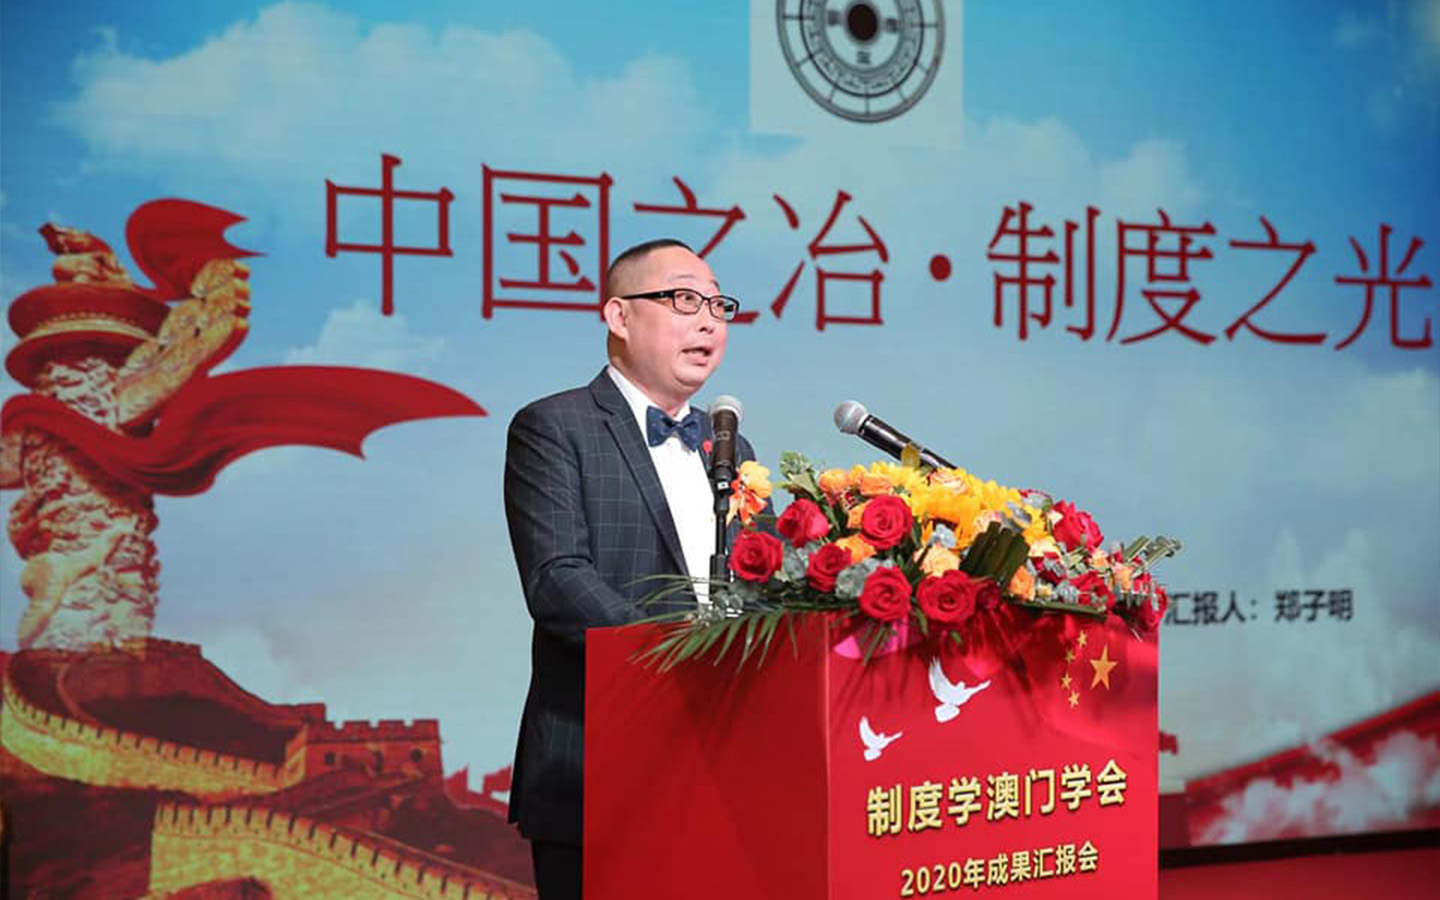 Jorge Chiang announces his intention to contest Macao’s Chief Executive election 